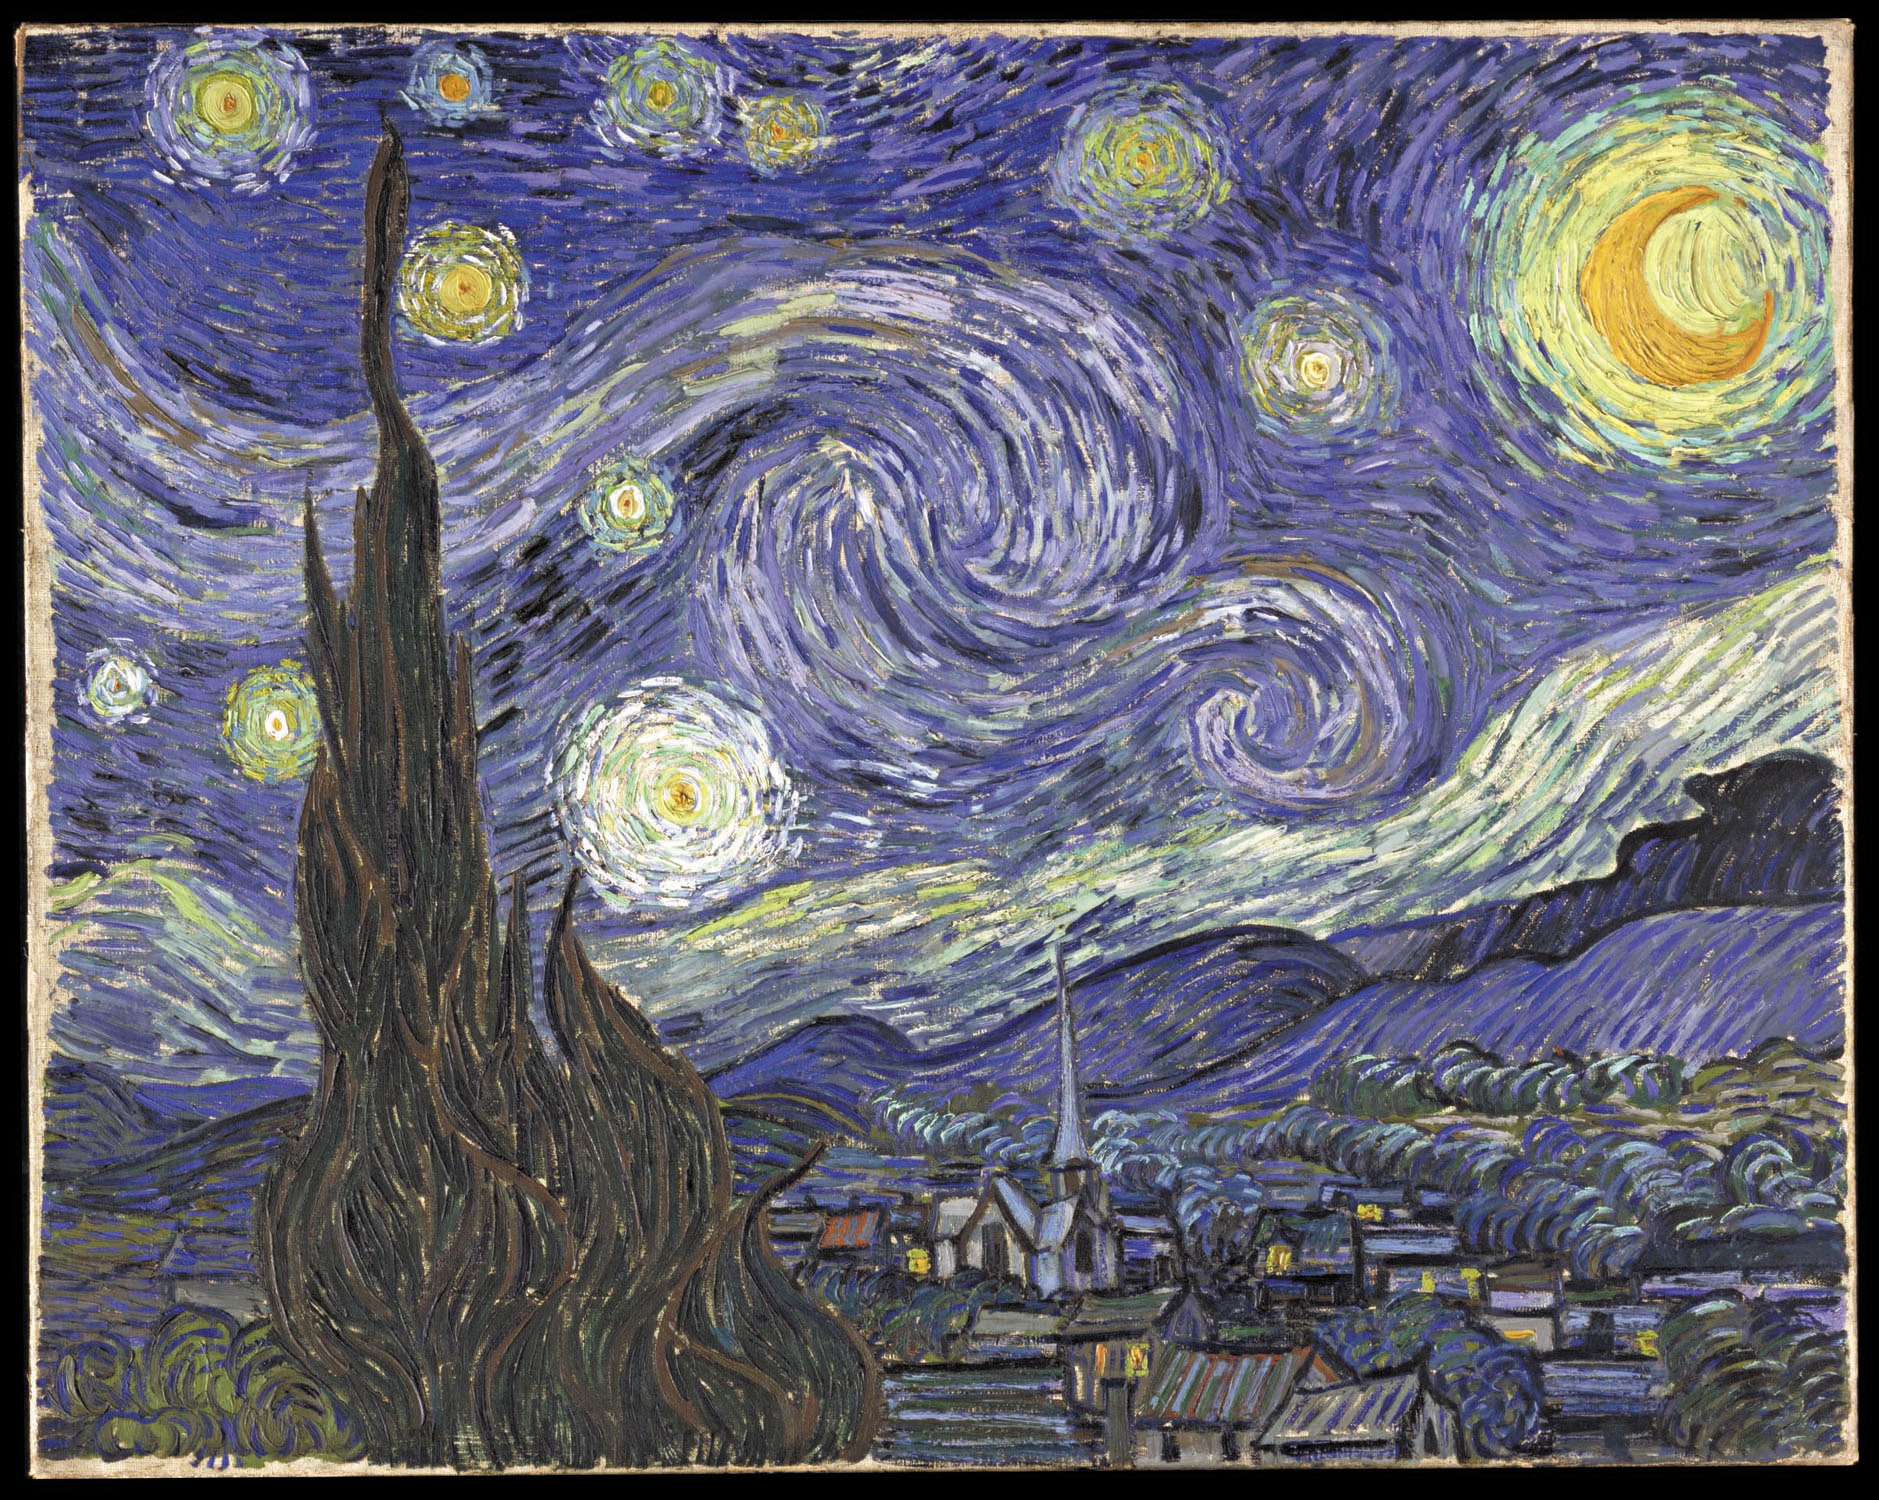 Vincent van Gogh, The Starry Night, 1889, oil on canvas, 73.7 x 92.1 cm. (The Museum of Modern Art)